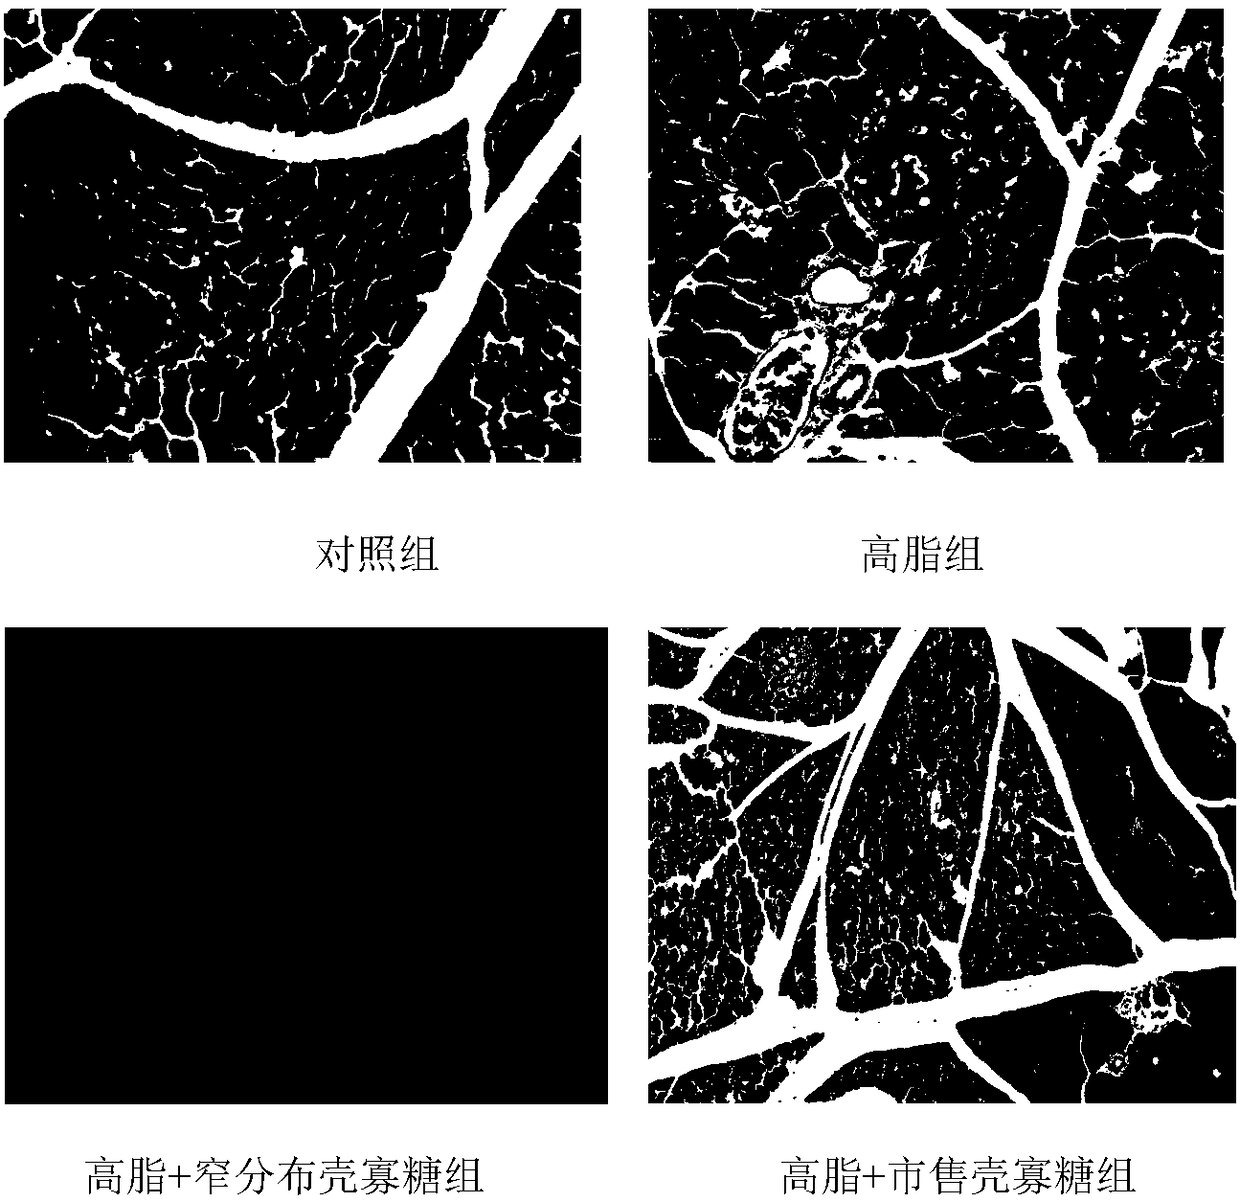 Application of narrow-range chitosan oligosaccharide in preparation of functional food for preventing hyperglycemia induced by long-term high-fat diet